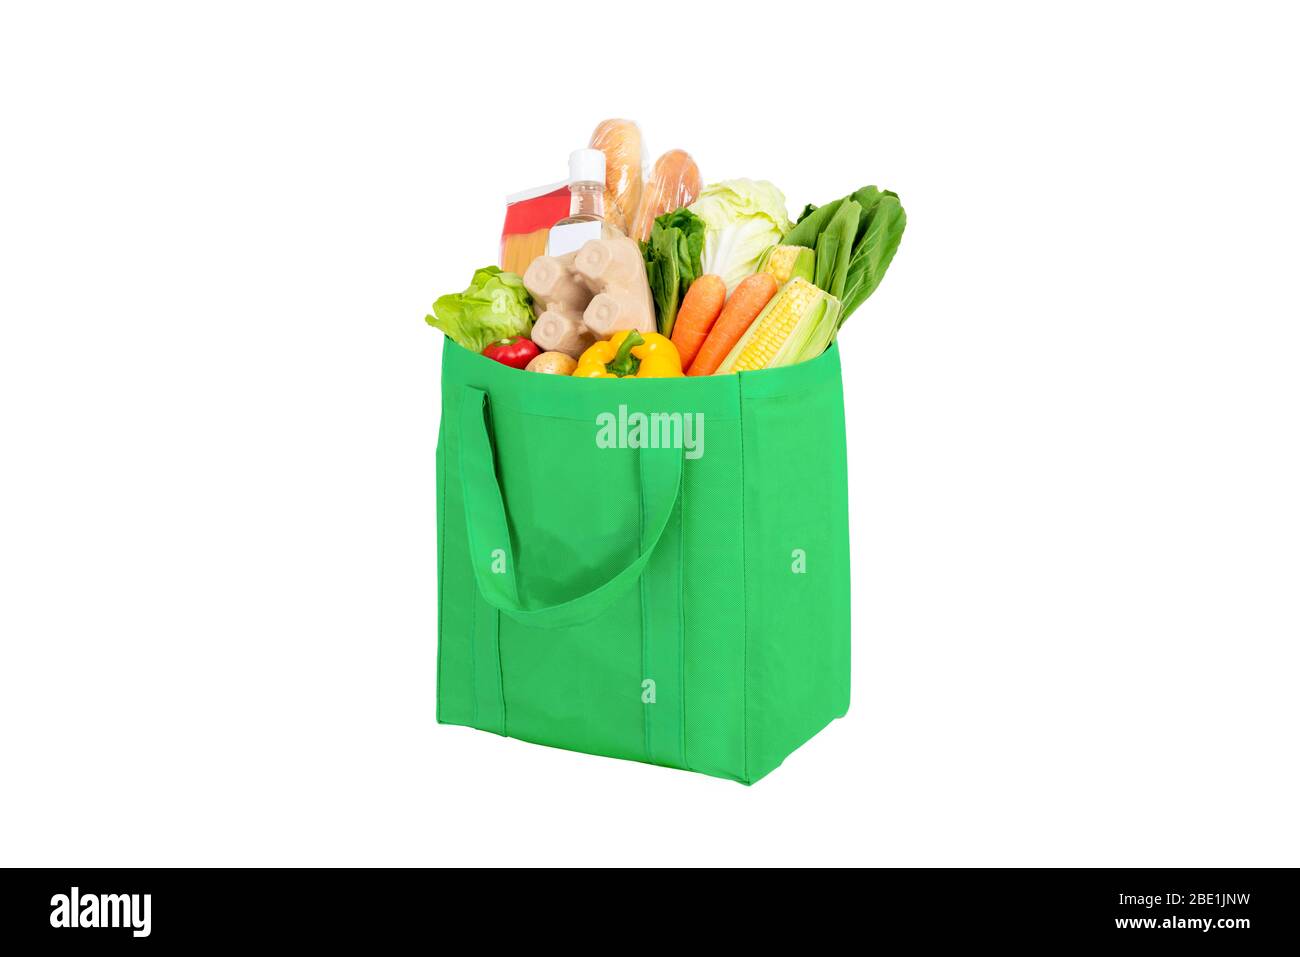 Green reusable shopping bag full of vegetables and groceries isolated on white background Stock Photo